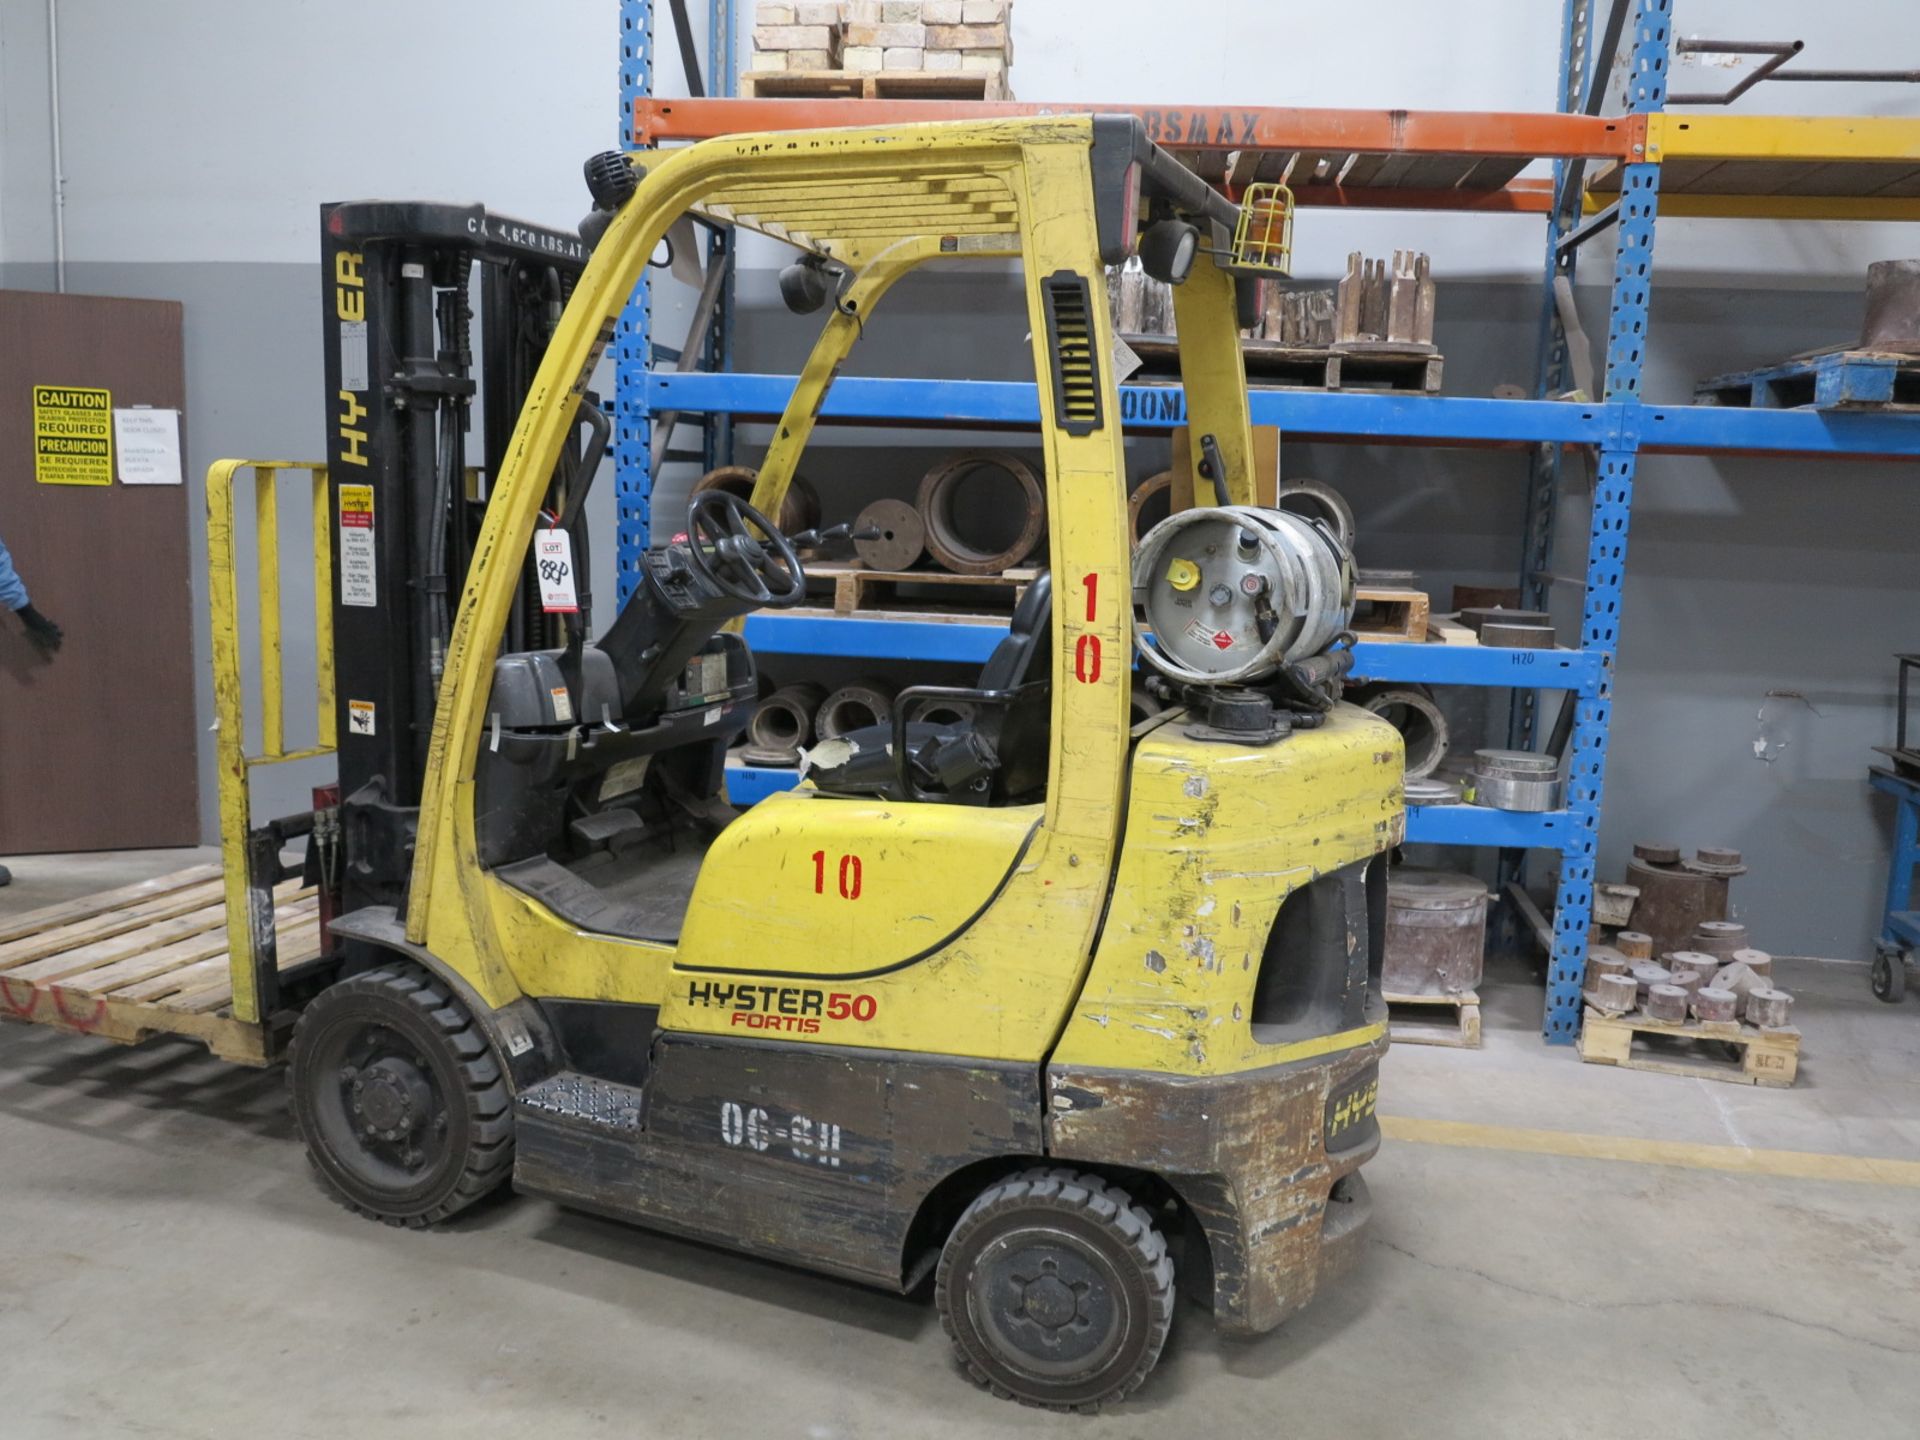 HYSTER 50 LP FORKLIFT, MODEL S50FT, 5,000 LB CAPACITY, 3-STAGE MAST, SIDE SHIFT, CUSHION TIRES, 7,